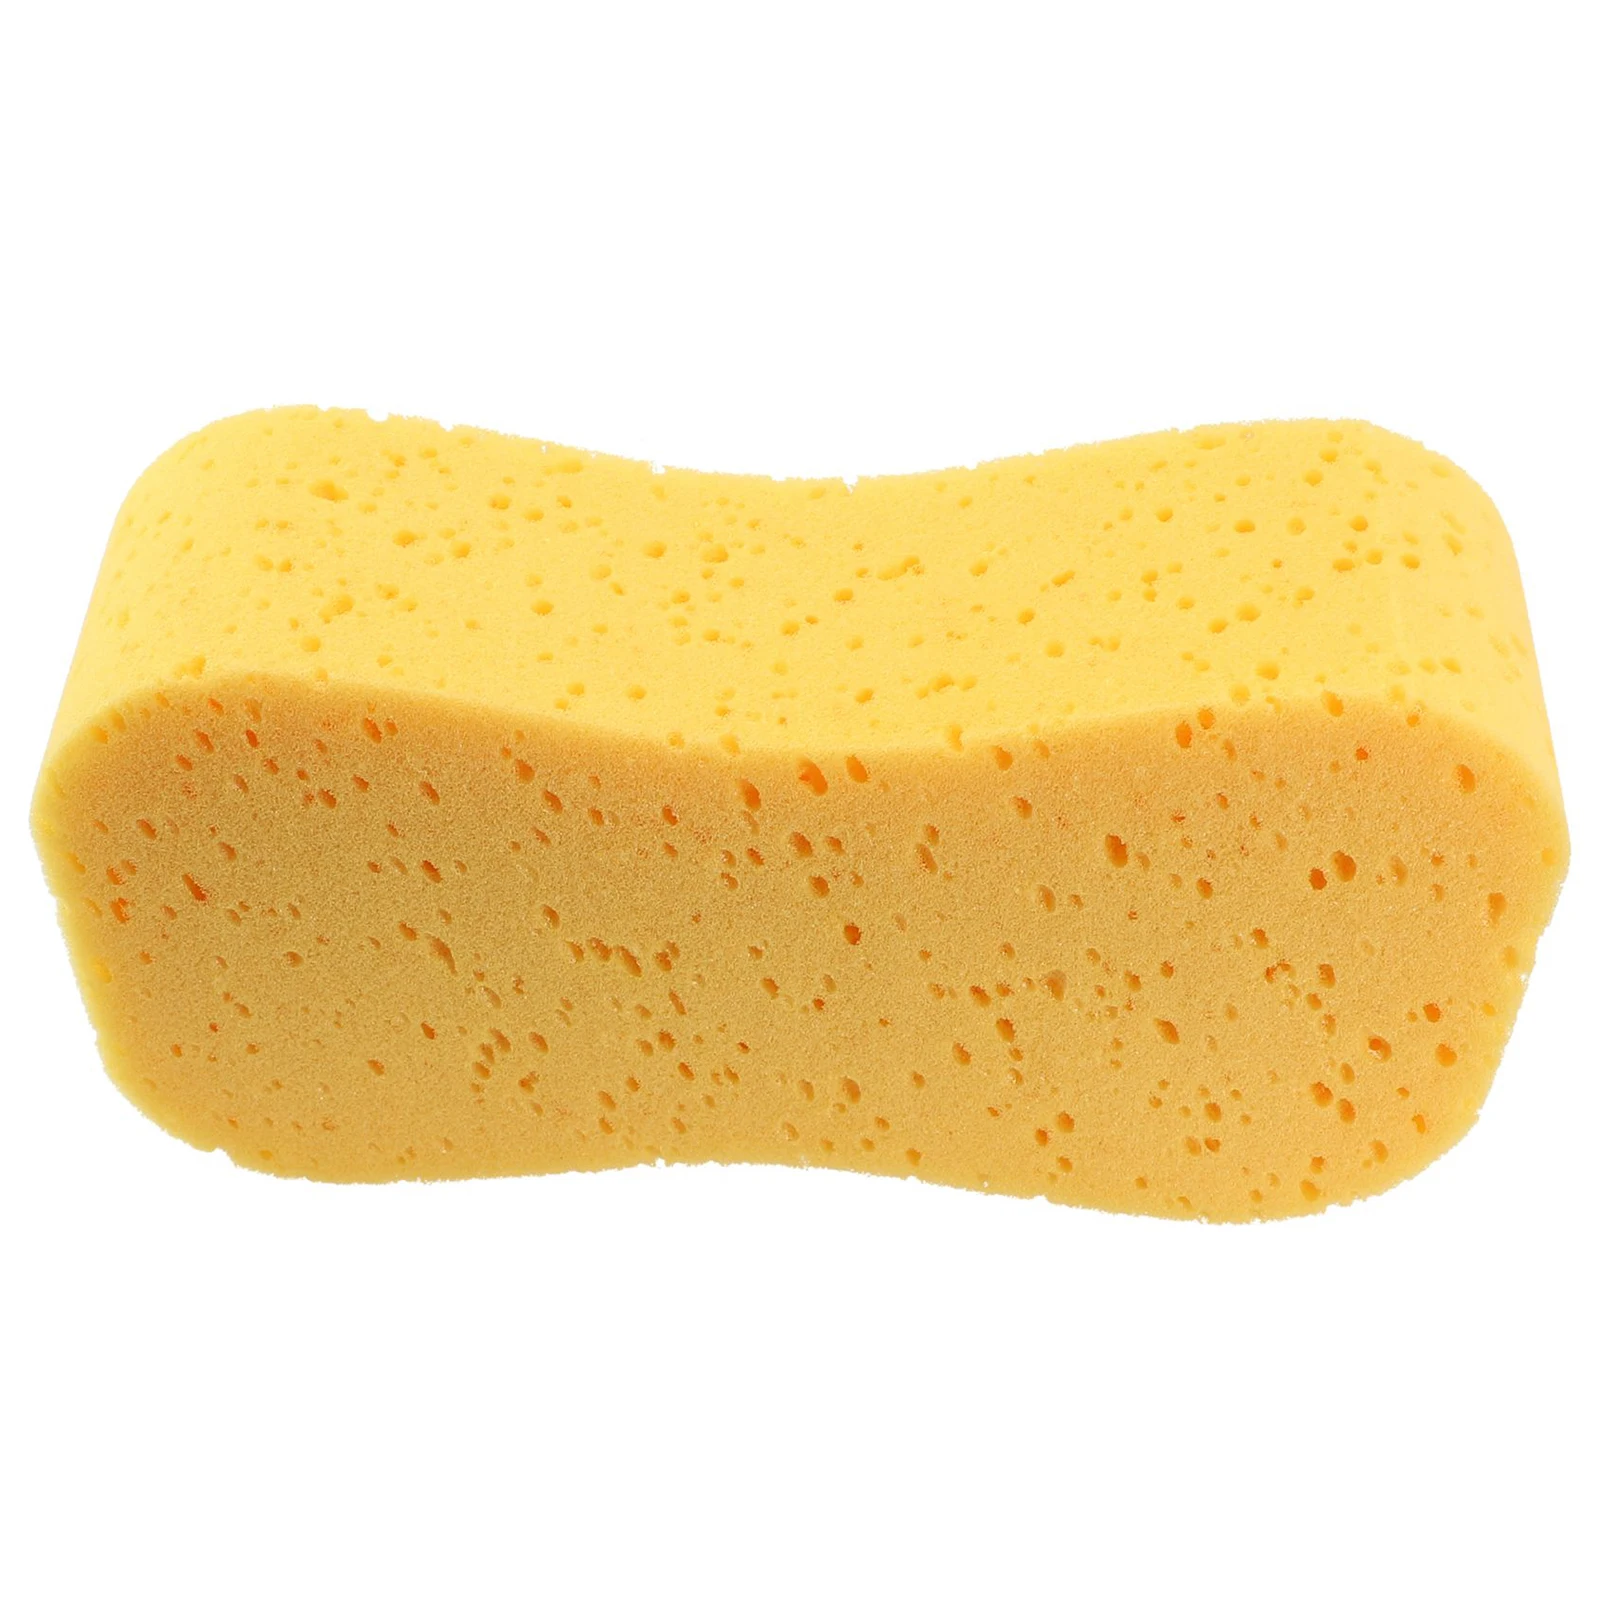 

Brand New Sponge Car Sponge For Car Cleaning For Kitchen Cleaning Large 8-shaped Sponges Strong Water Absorption